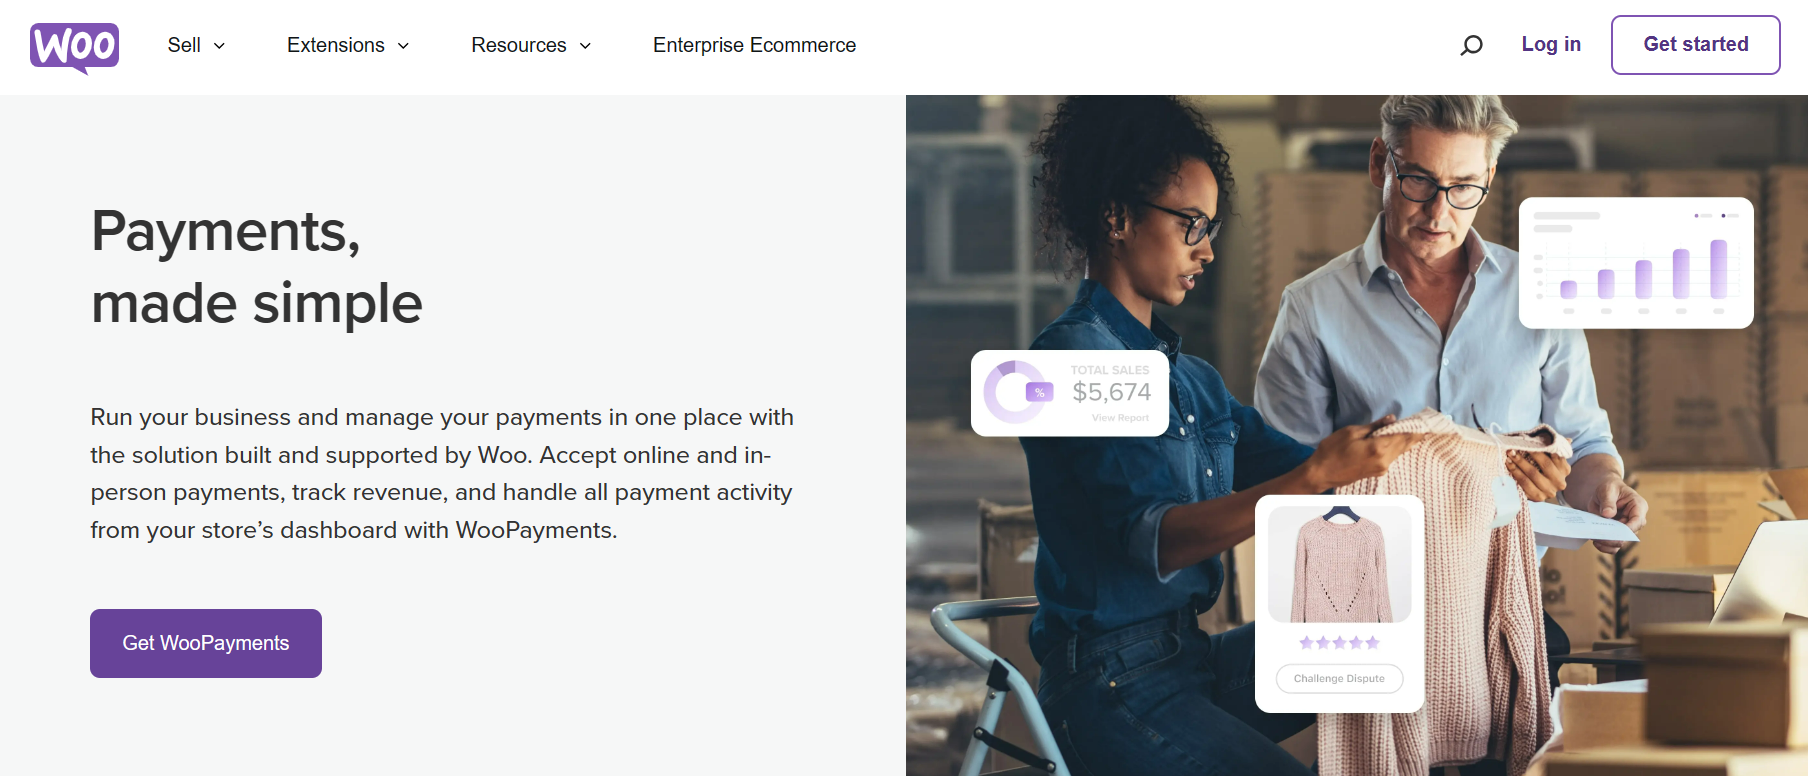 WooCommerce: Empowering WordPress Users with a Powerful Ecommerce Plugin